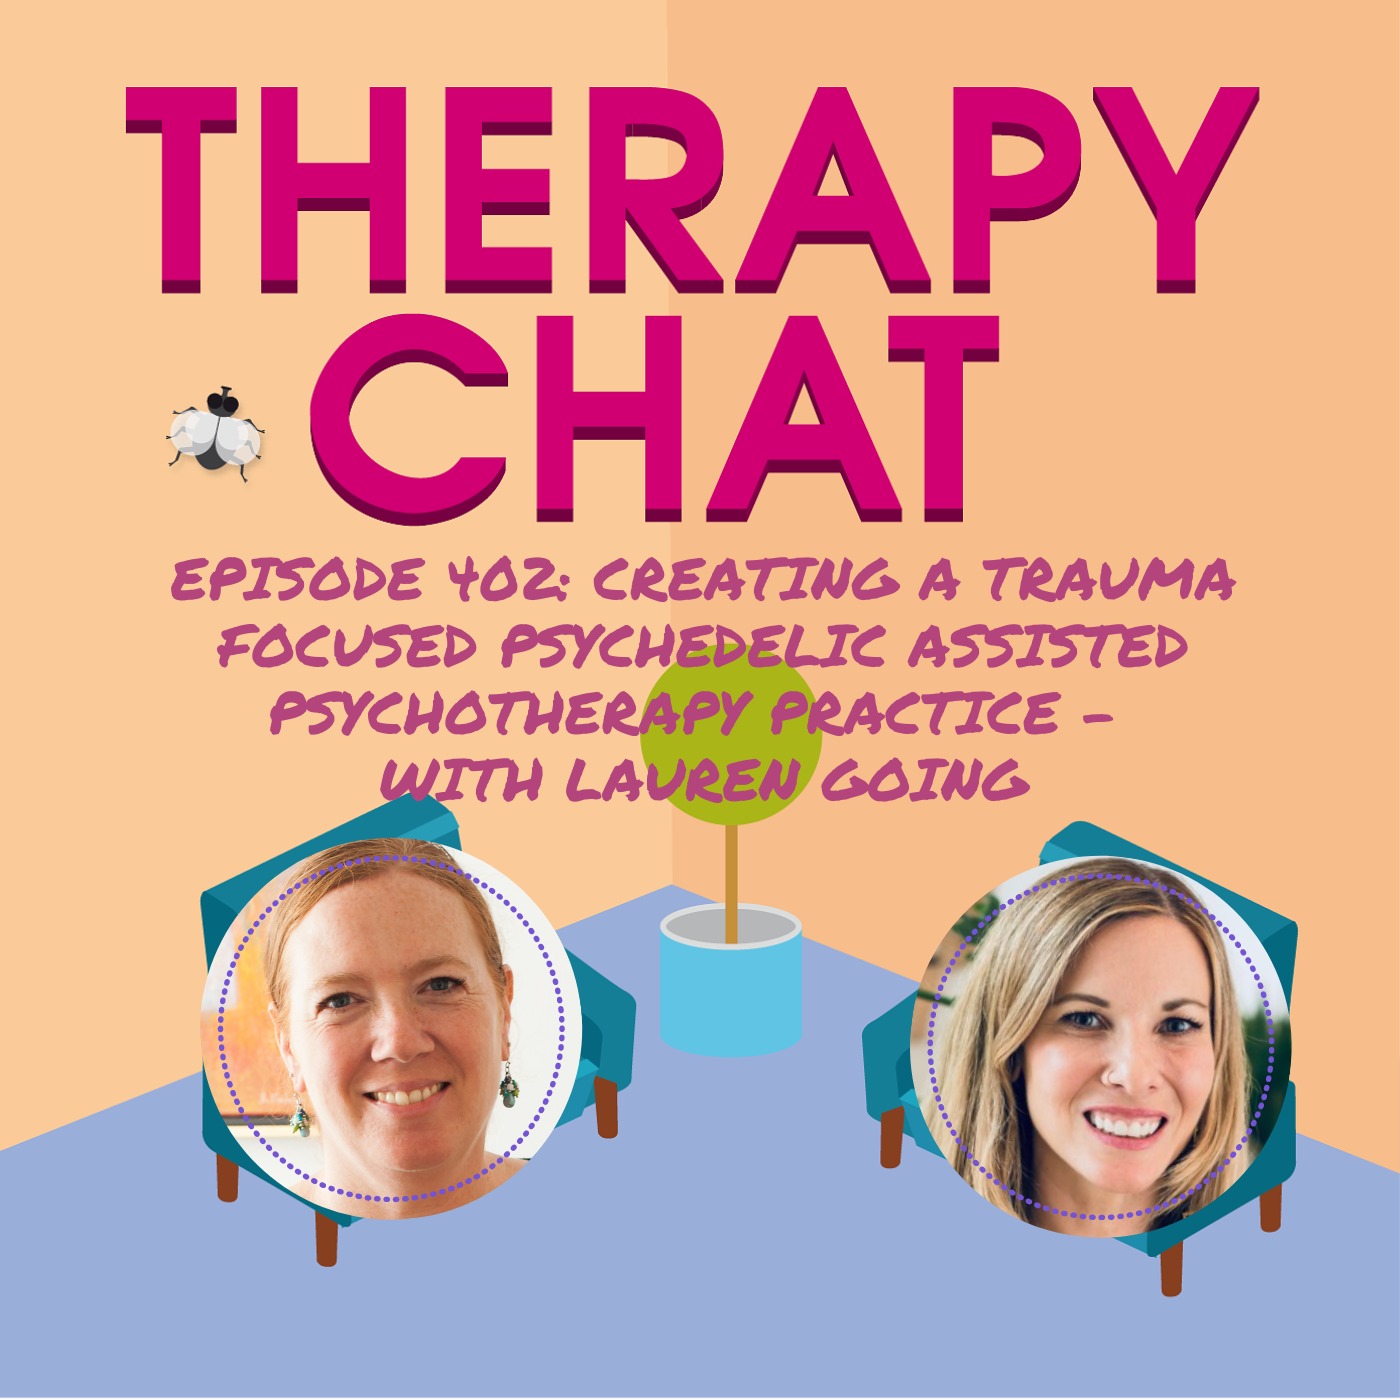 402: Creating A Trauma-focused Psychedelic-assisted Psychotherapy Practice With Lauren Going